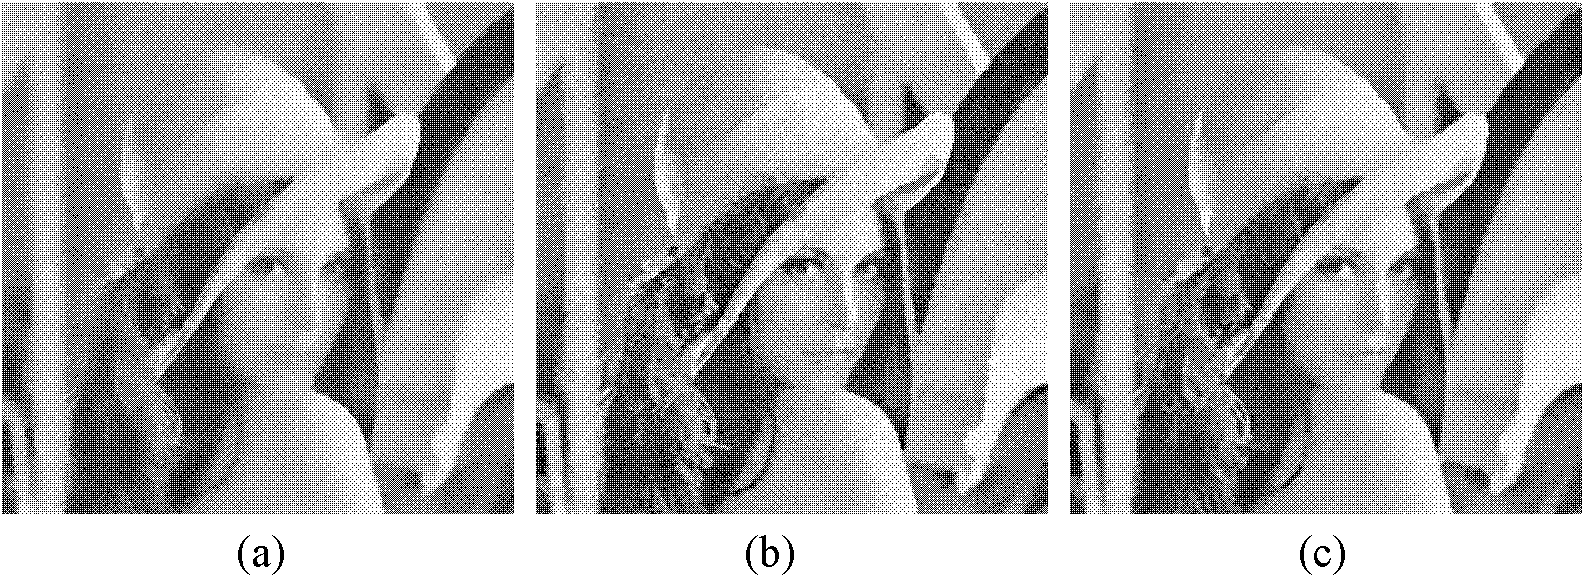 Image denoising method based on Treelet and non-local means